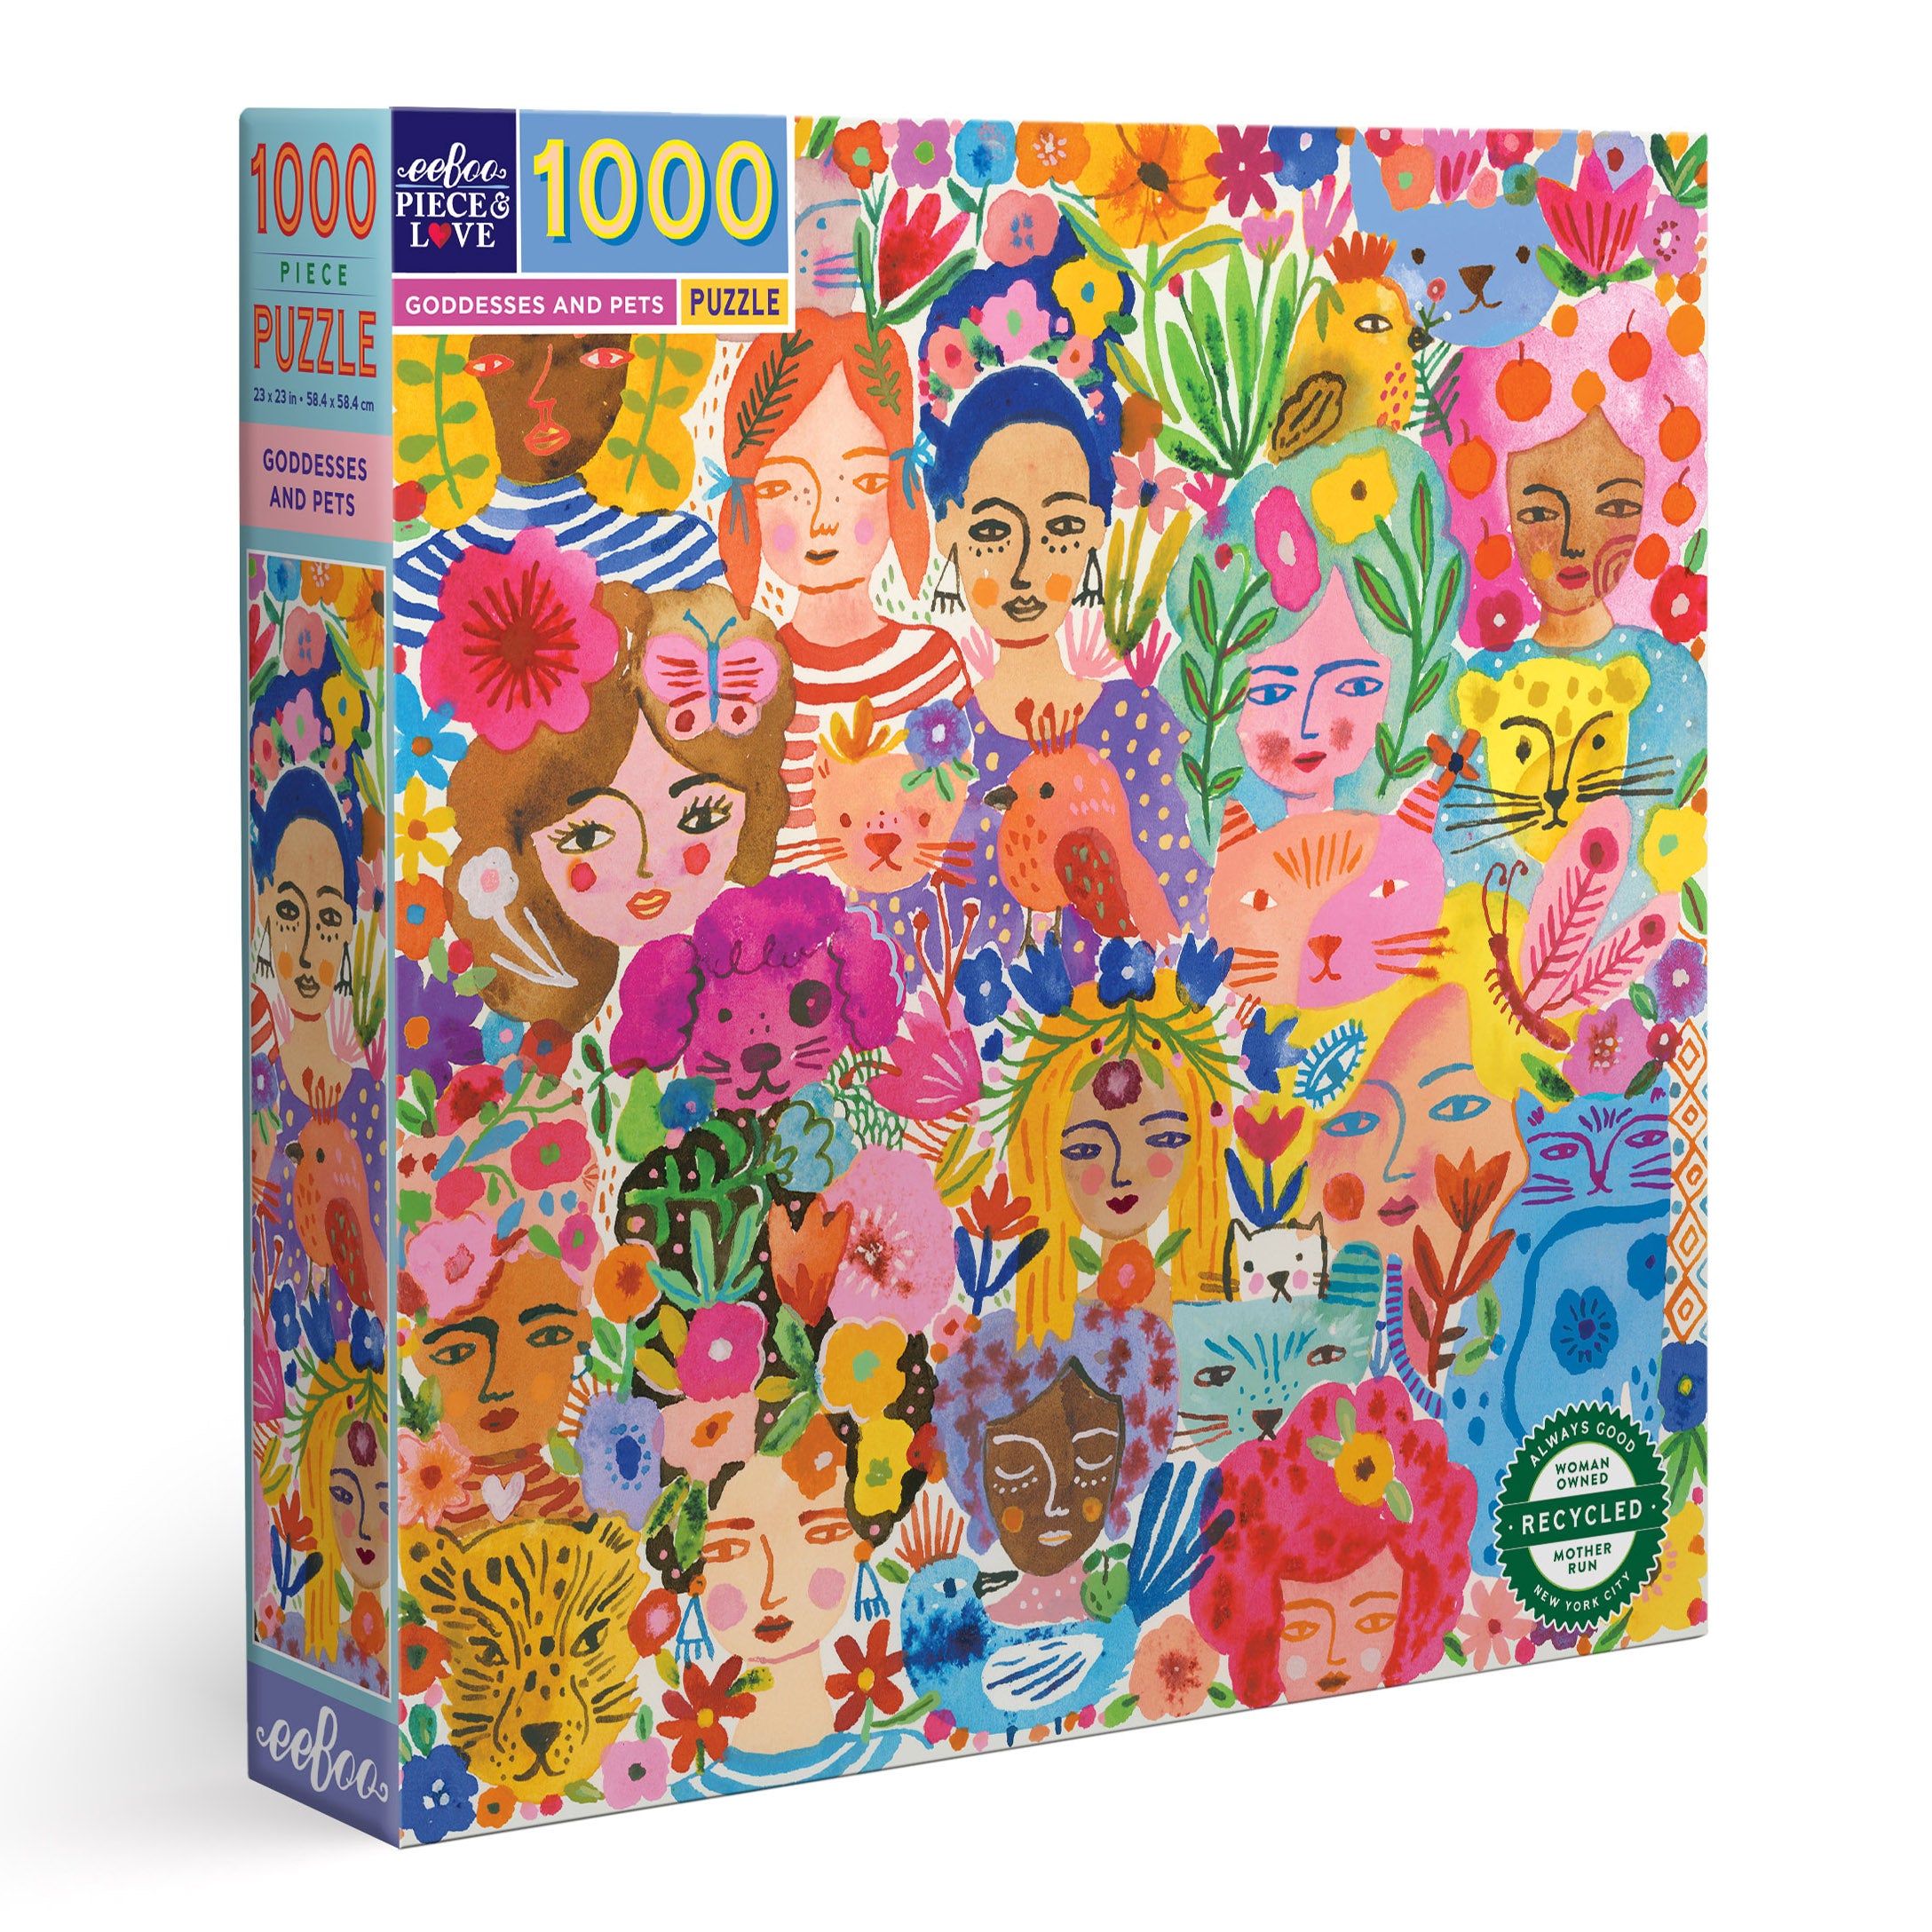 Goddesses and Pets 1000 Piece Square Jigsaw Puzzle eeBoo Gifts for 14+